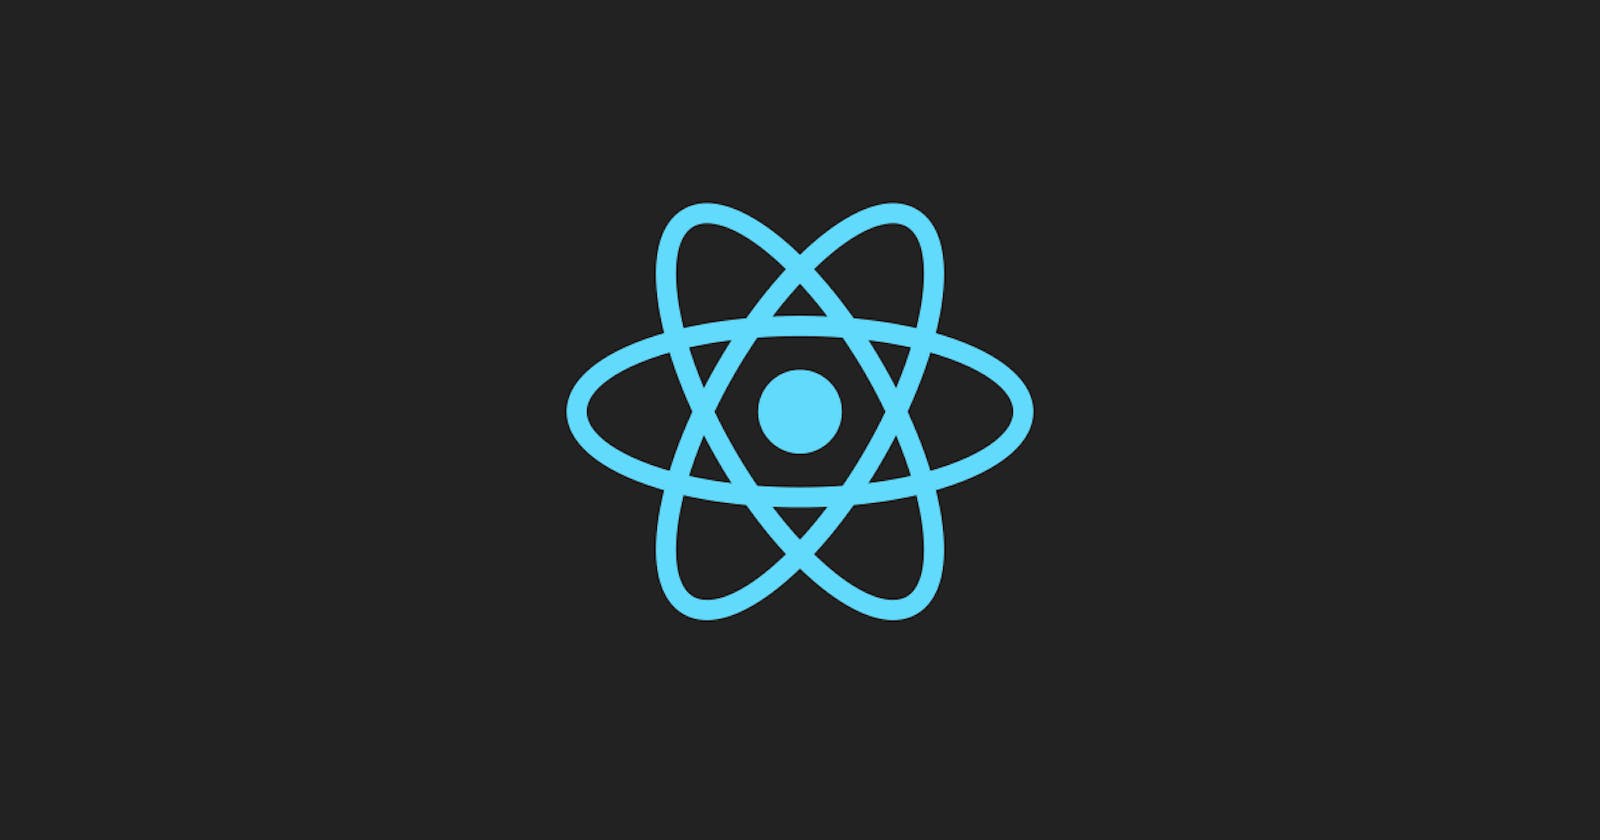 5 reasons why React.js is still the most popular front-end framework?